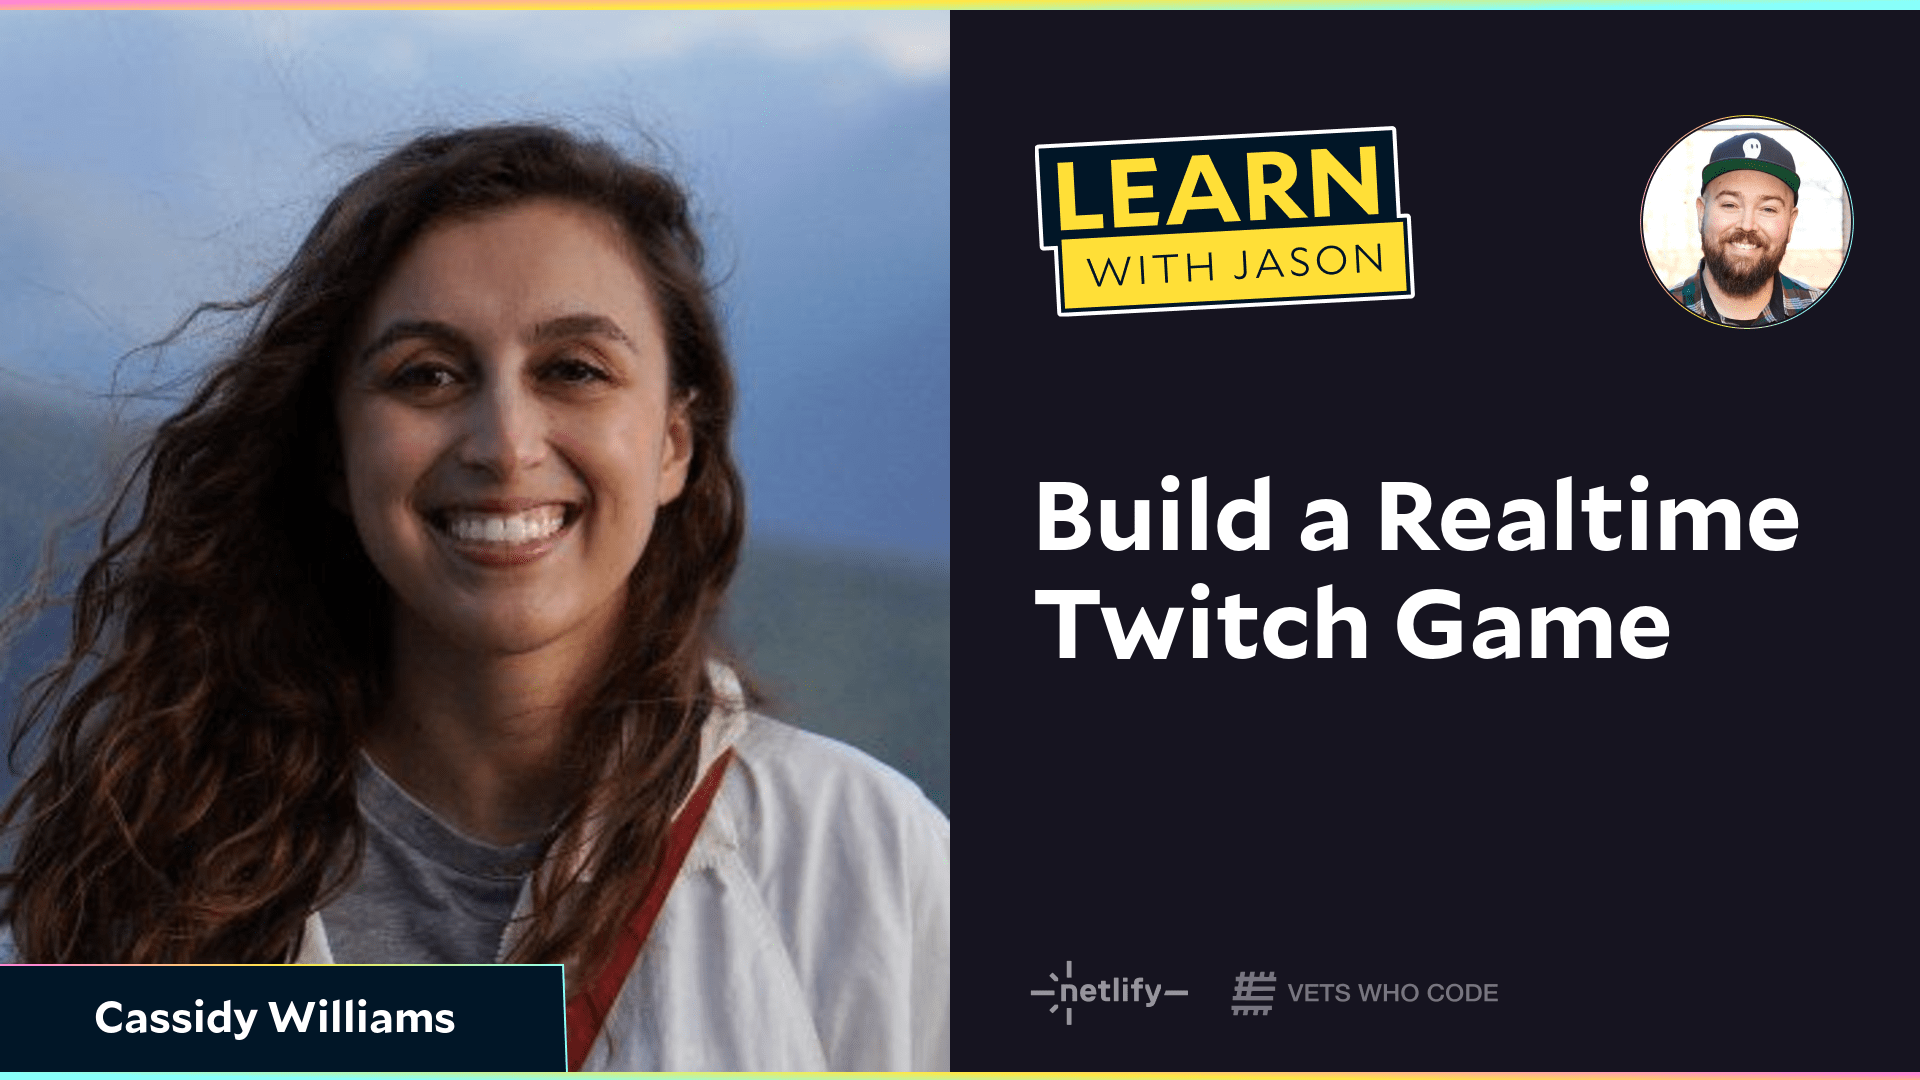 Build a Realtime Twitch Game (with Cassidy Williams)